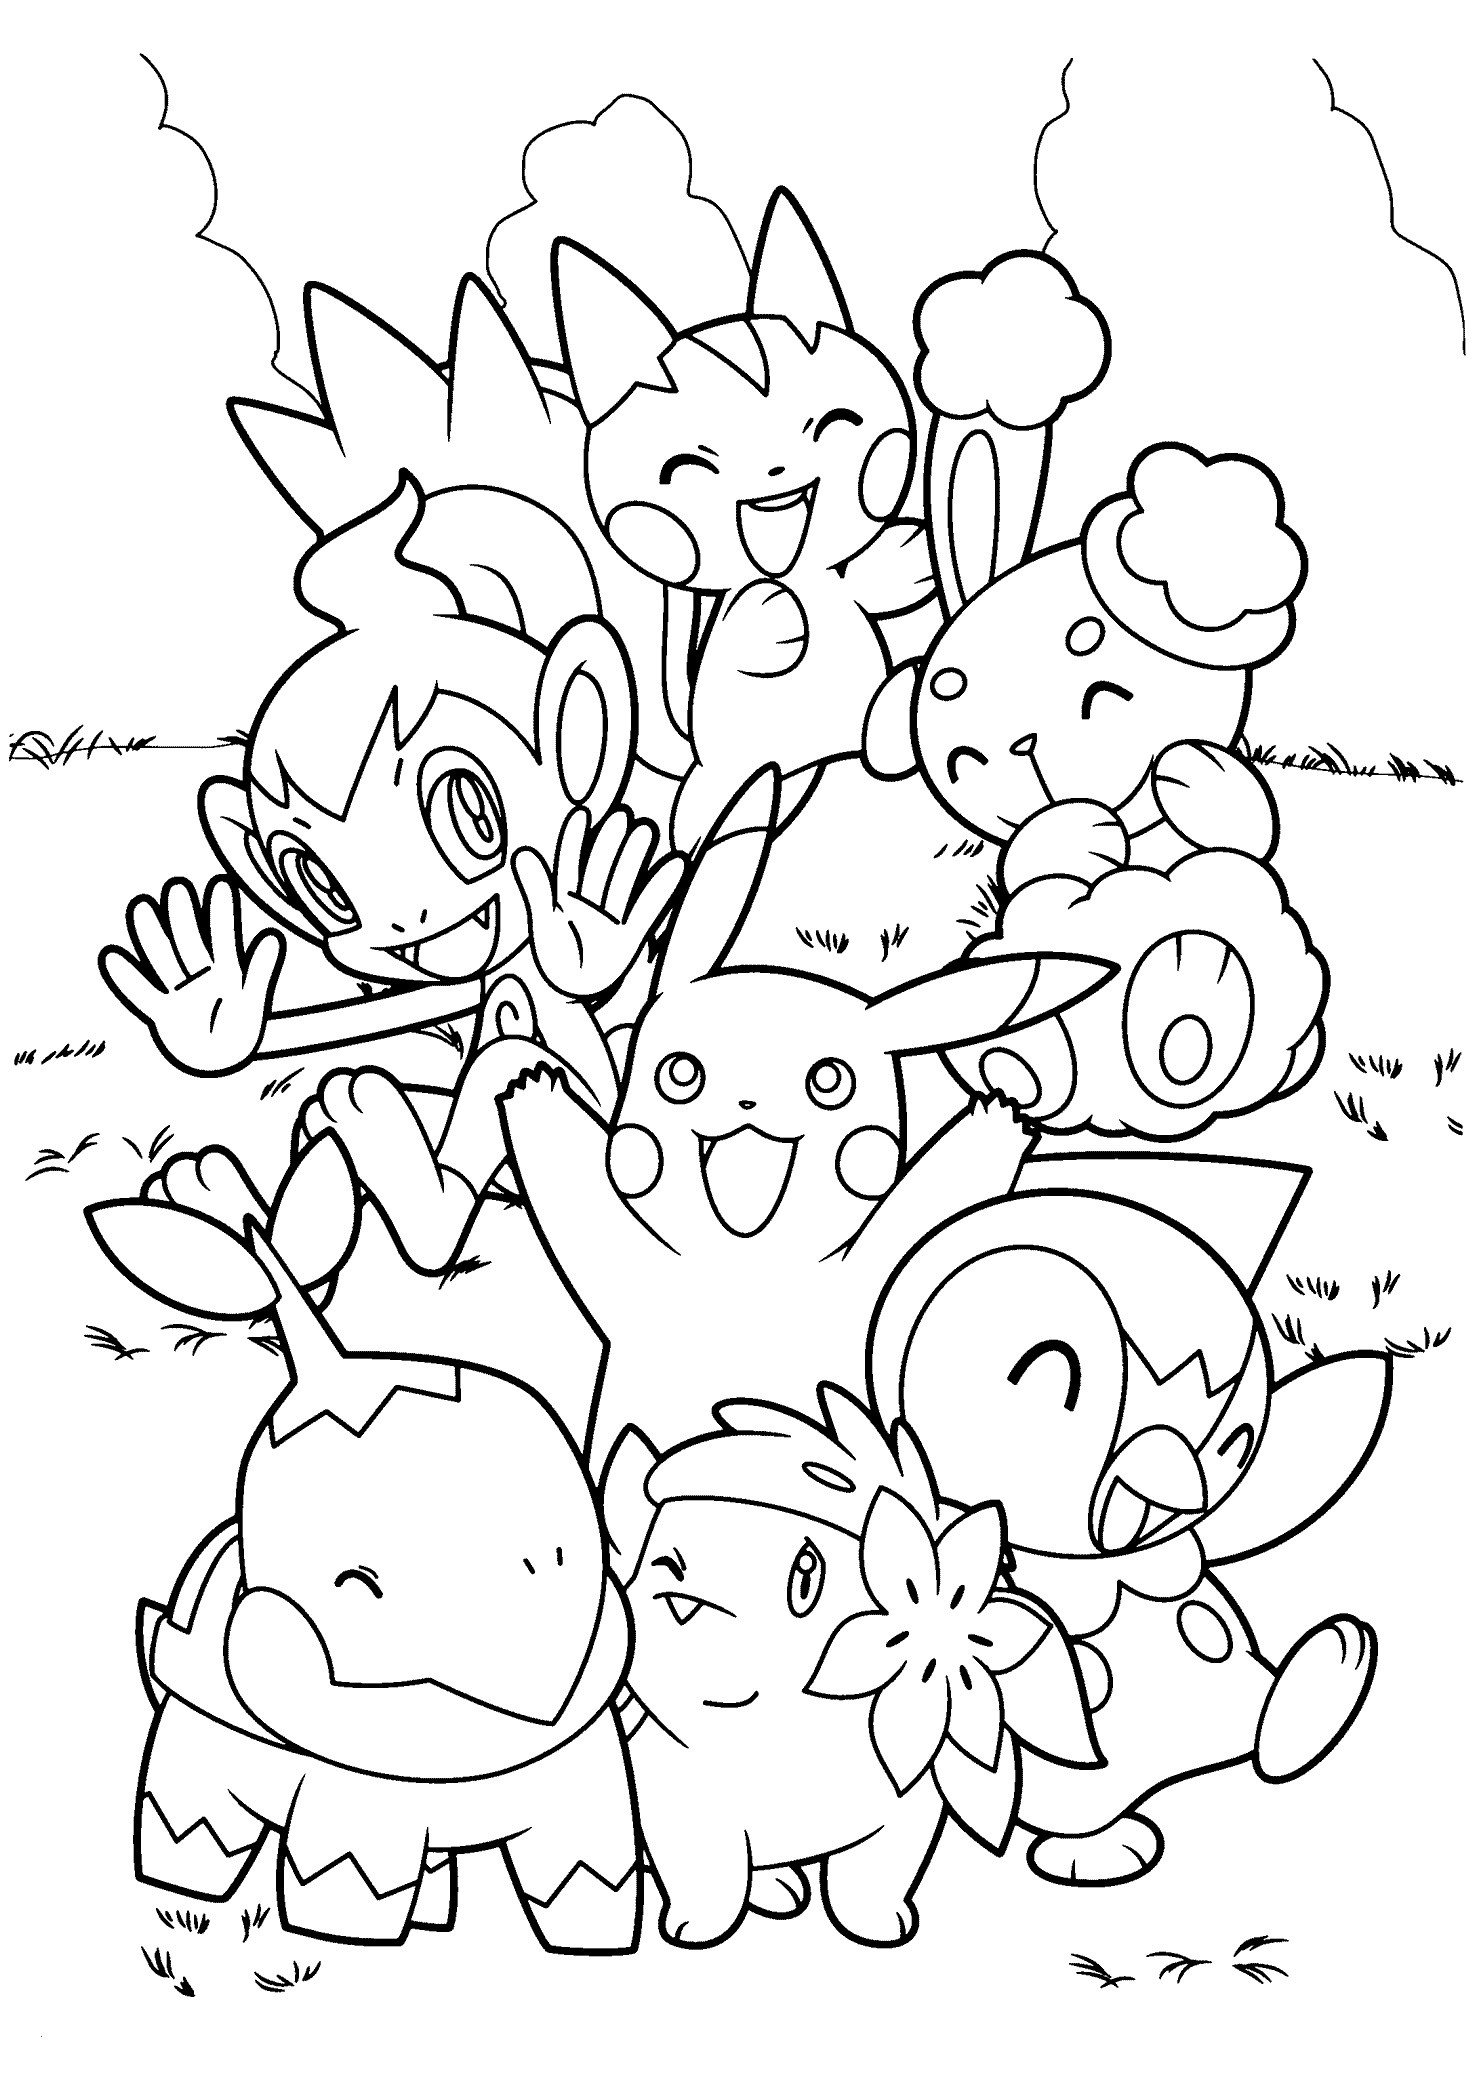 Coloring Pages to Color line Fabulous top 75 Free Printable Pokemon Coloring Pages Line